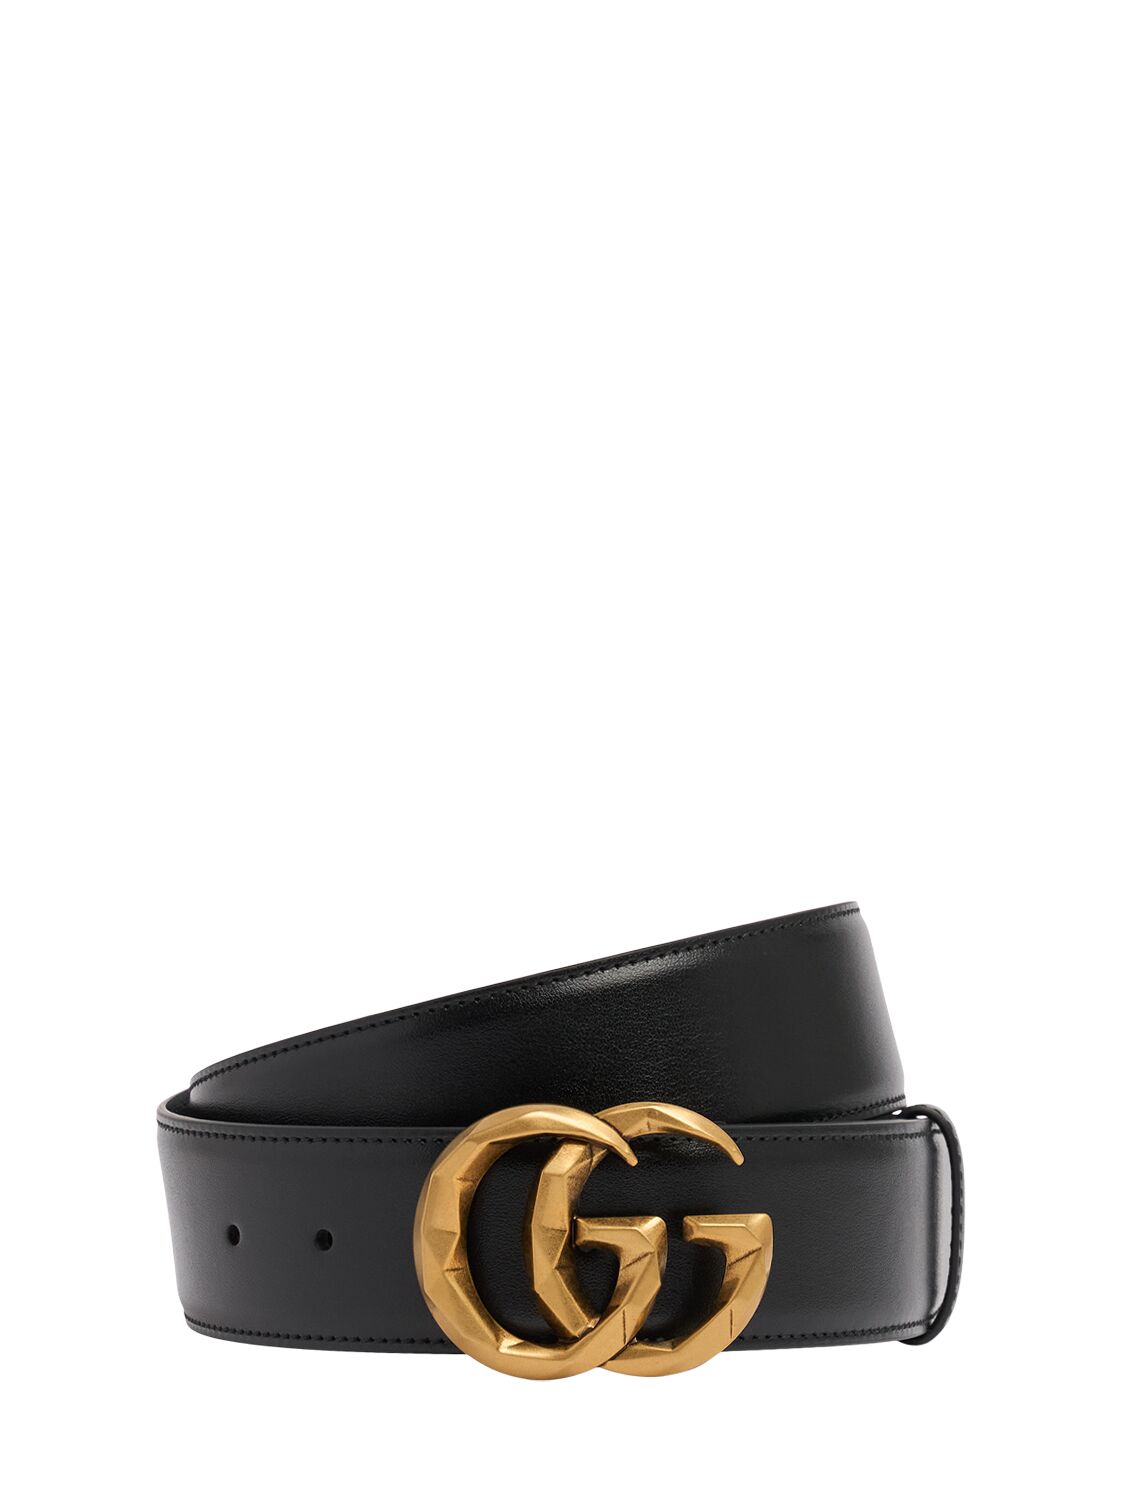 Gucci 4cm Gg Marmont Leather Belt In Black